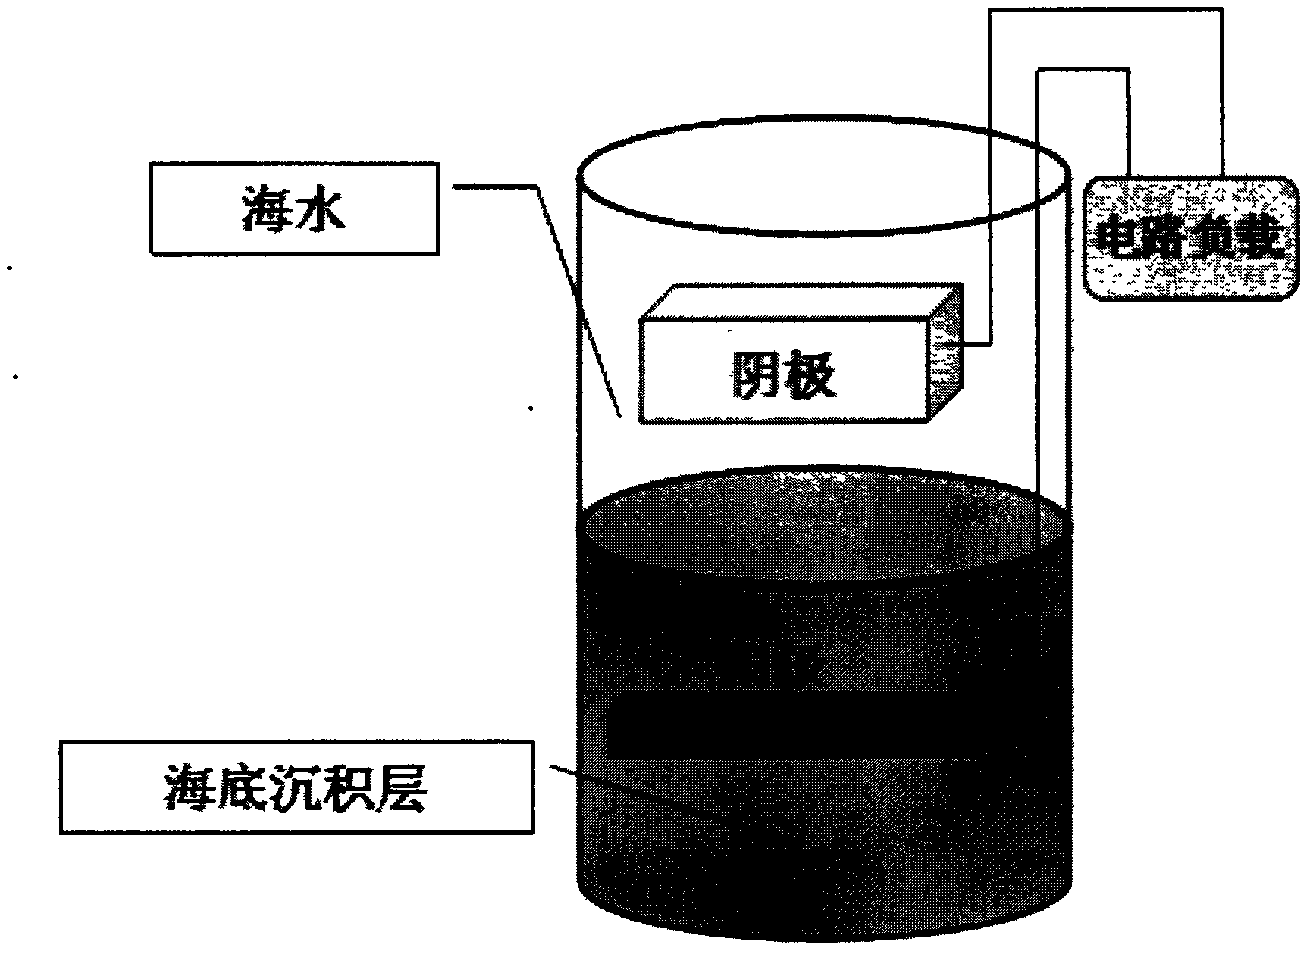 Method for constructing ocean sediment microbial fuel battery with high output voltage and high output power